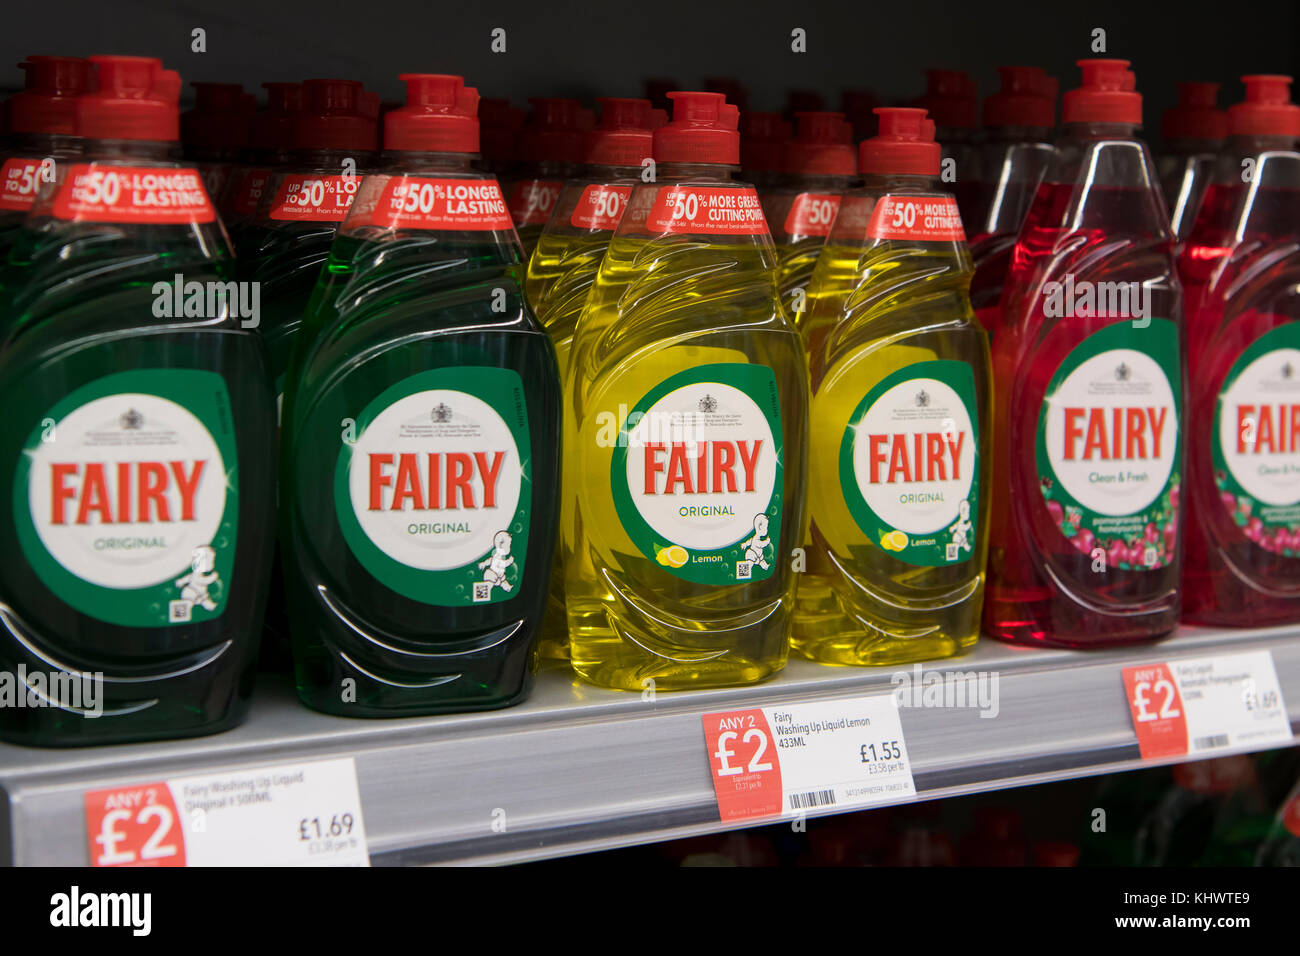 Bottles of fairy liquid on sale on a shelf in a supermarket store in the UK. Stock Photo